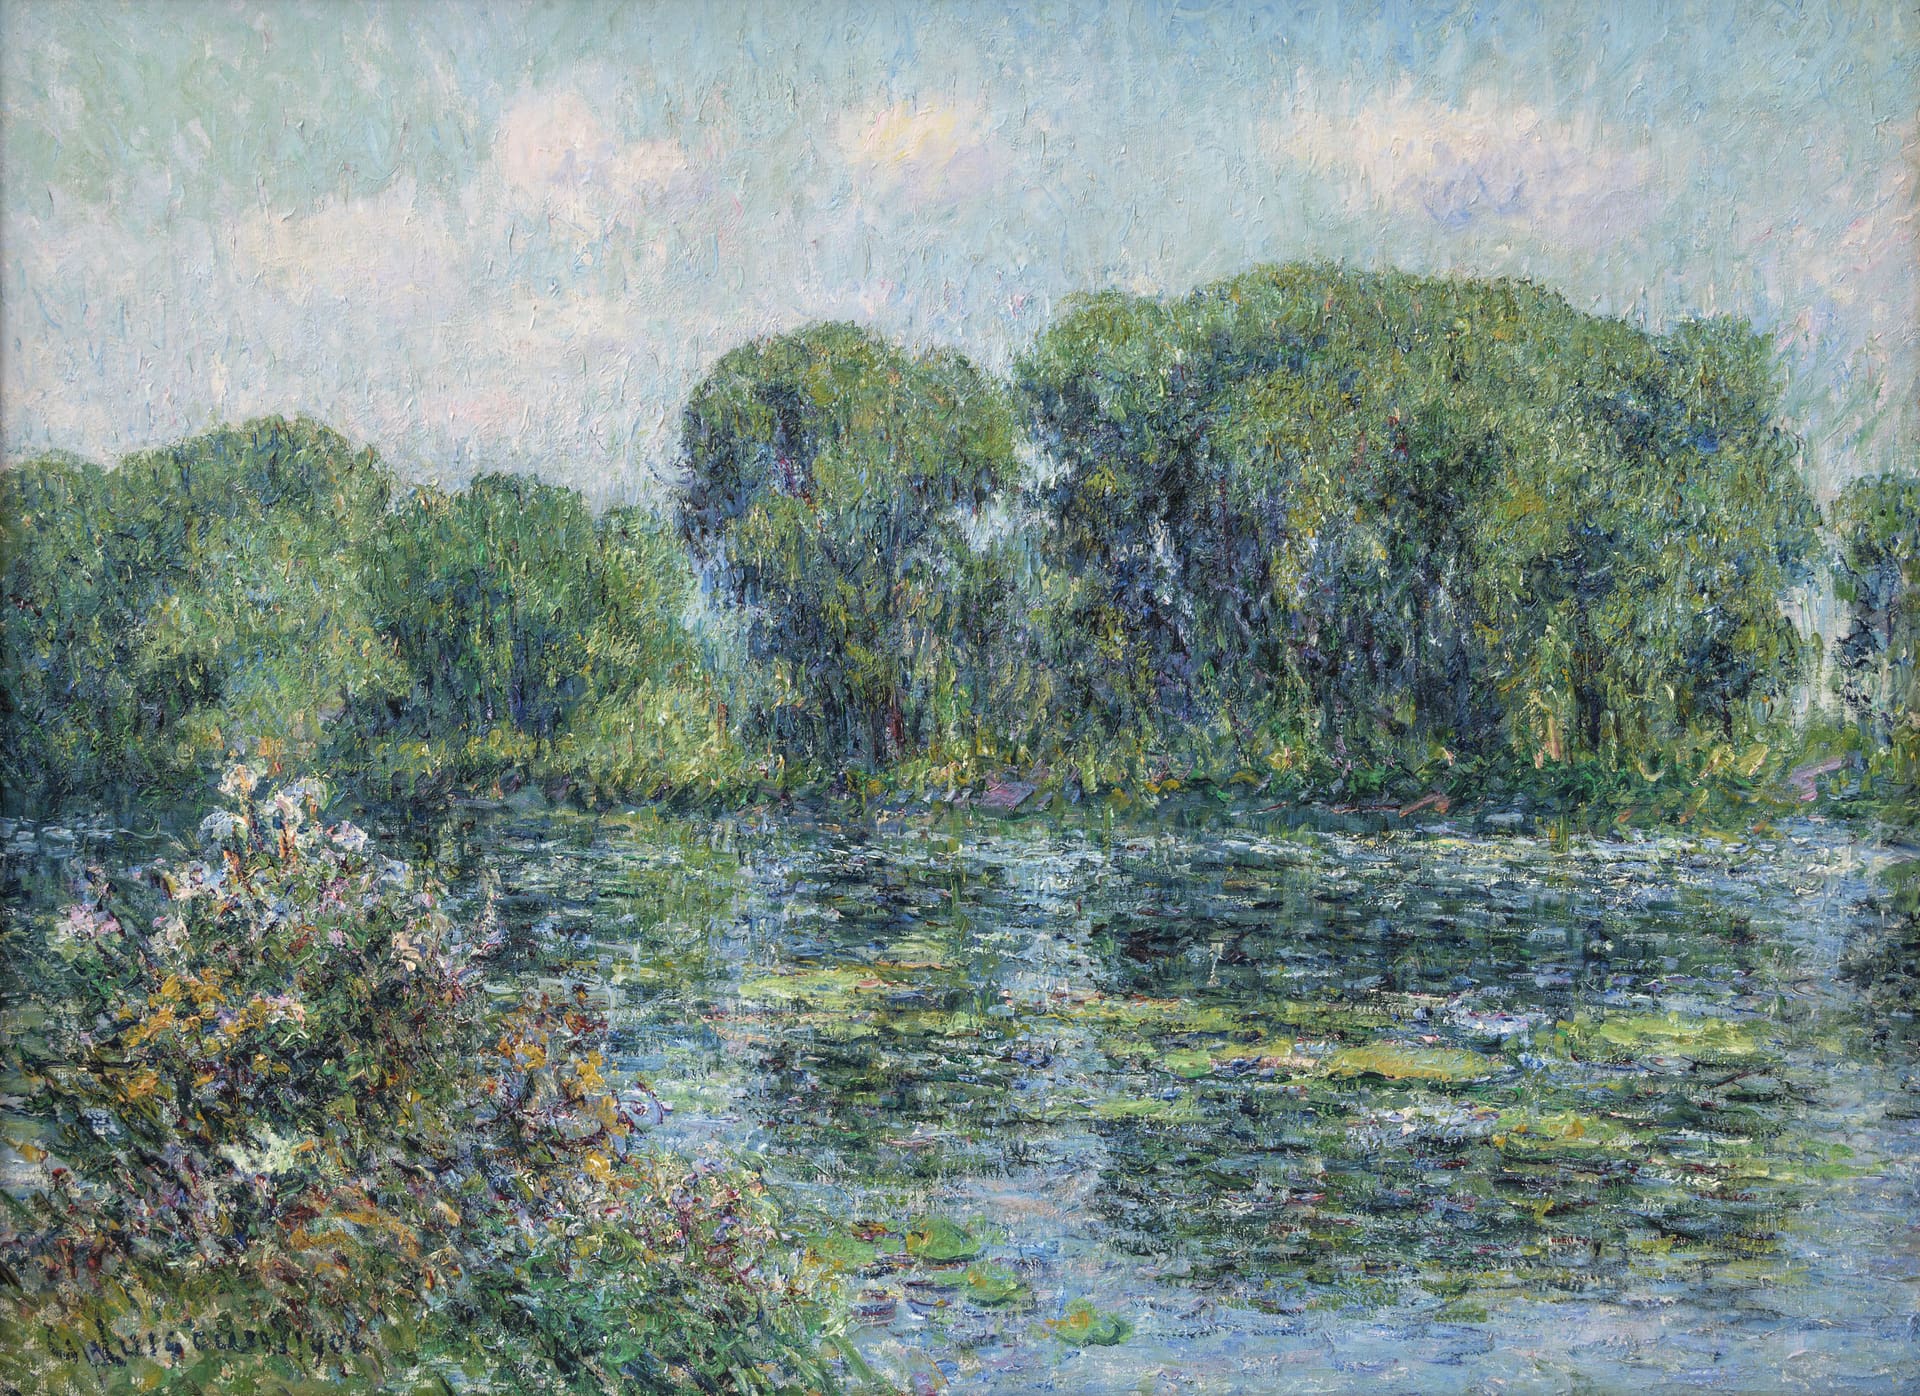 Gustave Loiseau's La Seine a' Herblay, ete. 1906. An Impressionist landscape of waterlilies along the Seine. The setting is calm, bright and cheerful, likely early morning.